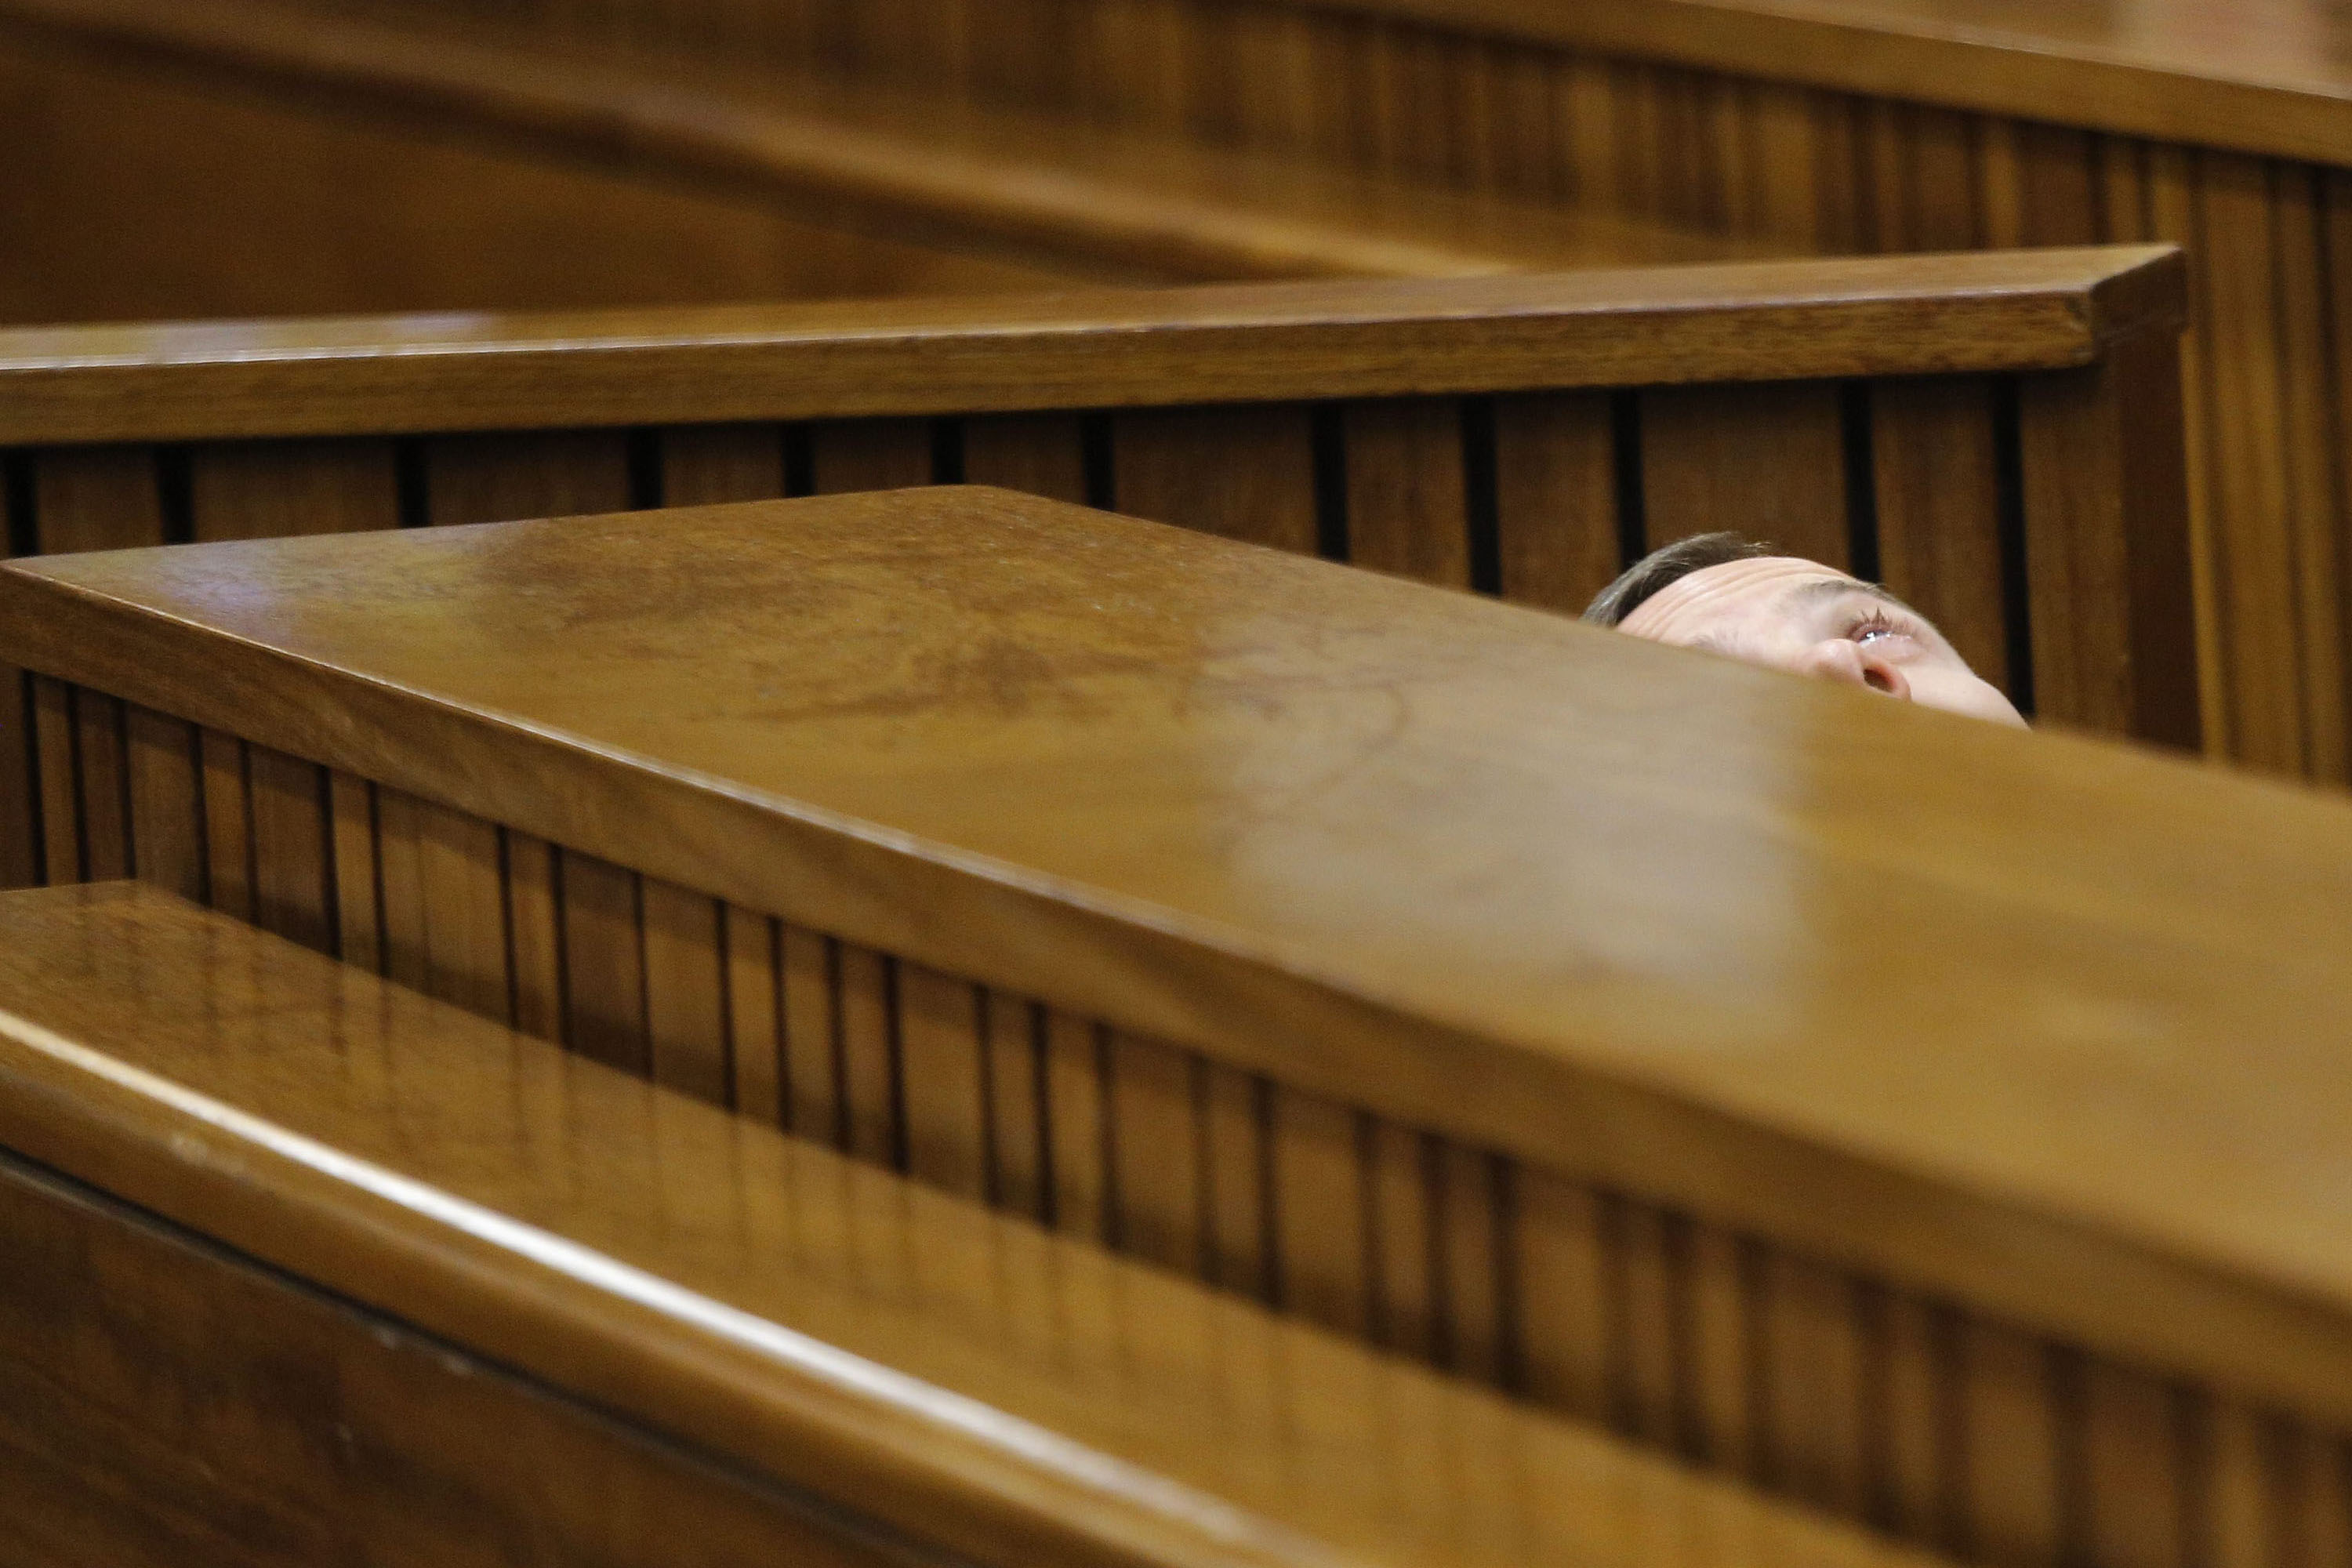 South African Paralympic athlete Oscar Pistorius is seen leaning back after applying eye drops as he prepares himself for another day in the dock during his ongoing murder trial in Pretoria, South Africa, March 14, 2014.